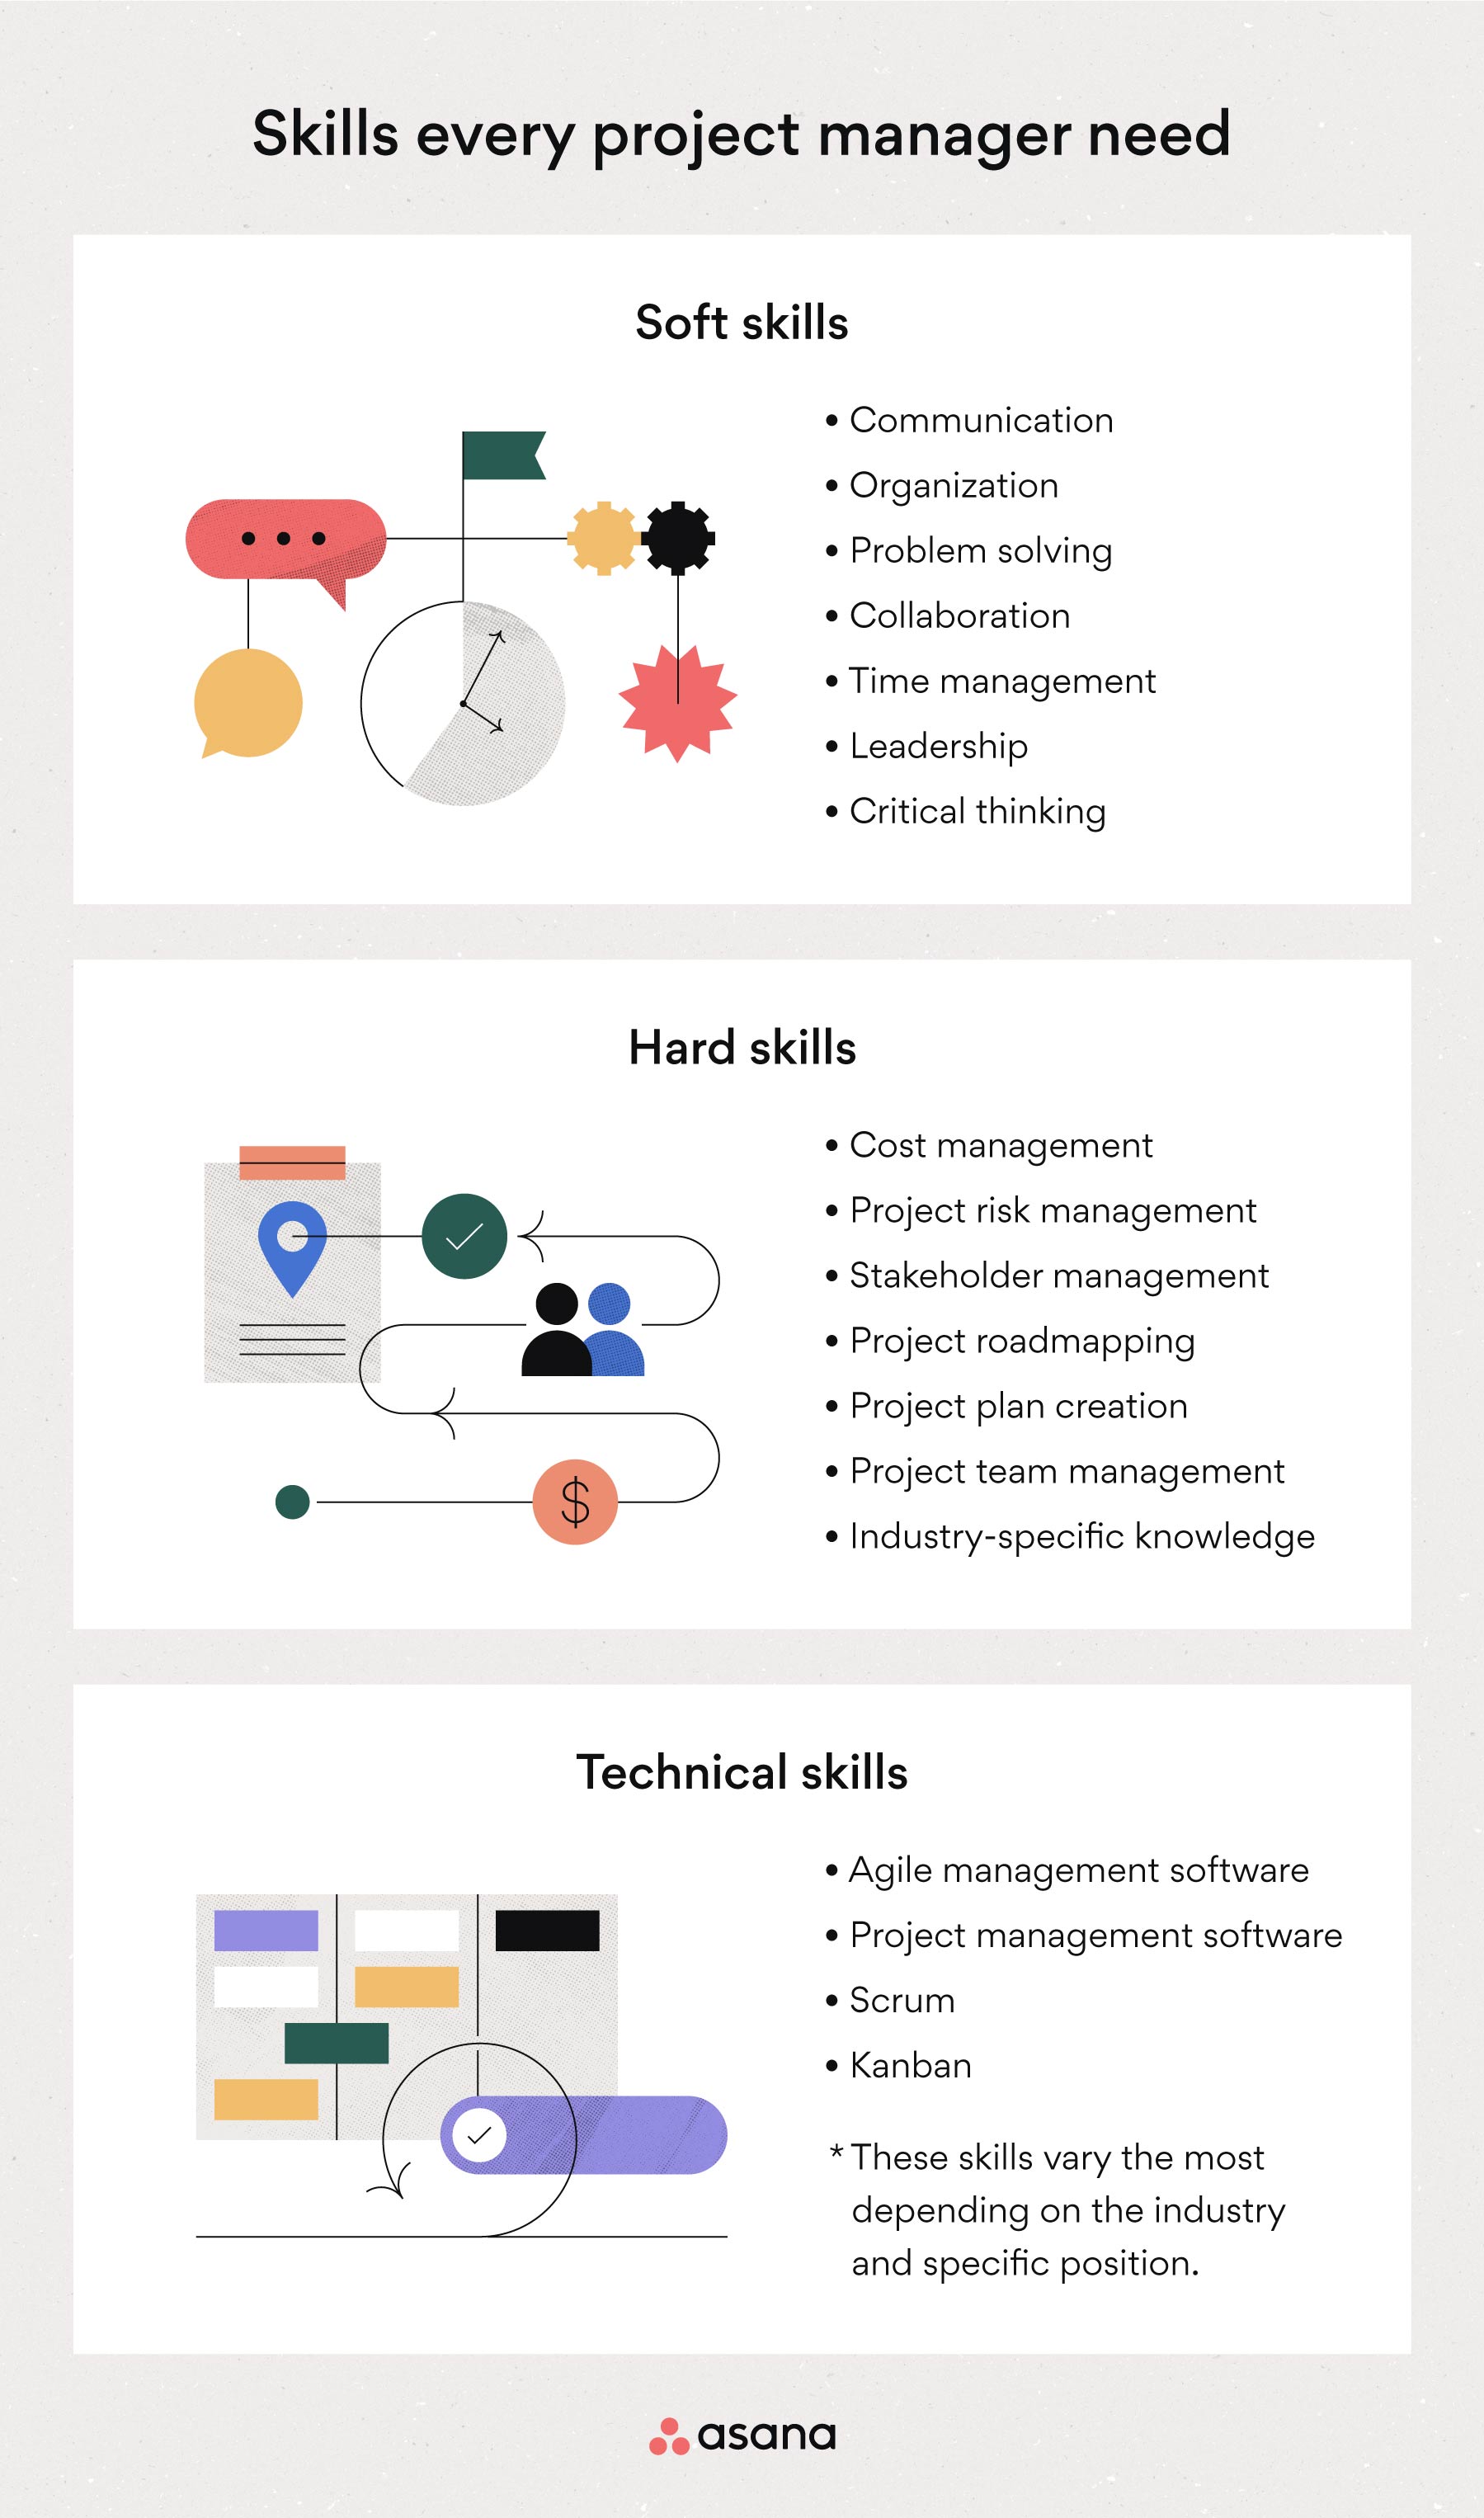 [inline illustration] Skills every project manager needs (infographic)